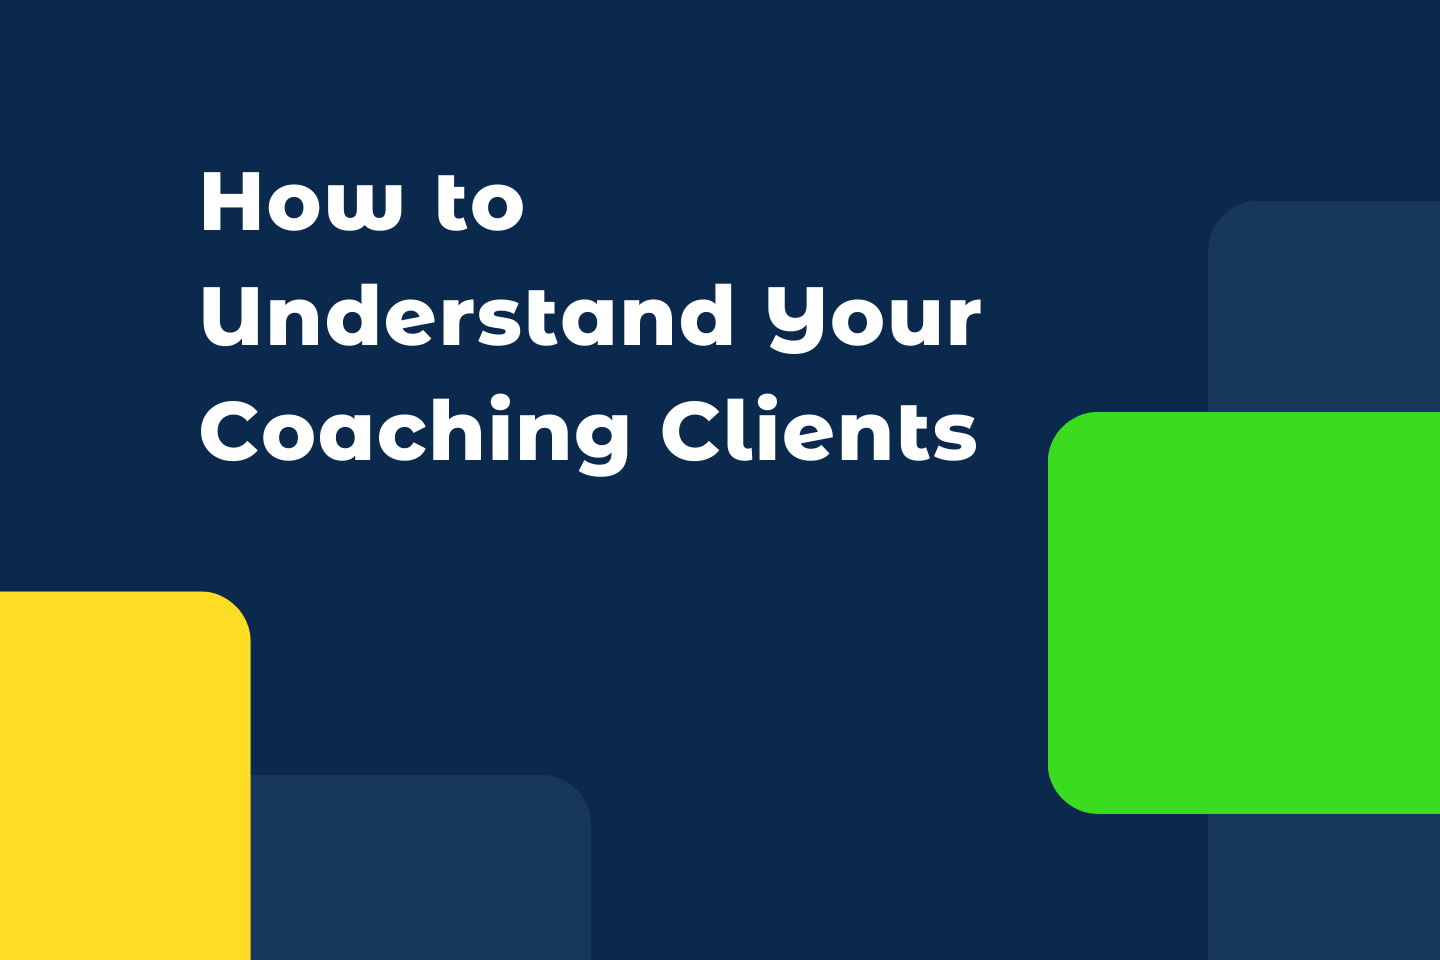 How to Understand Your Coaching Clients